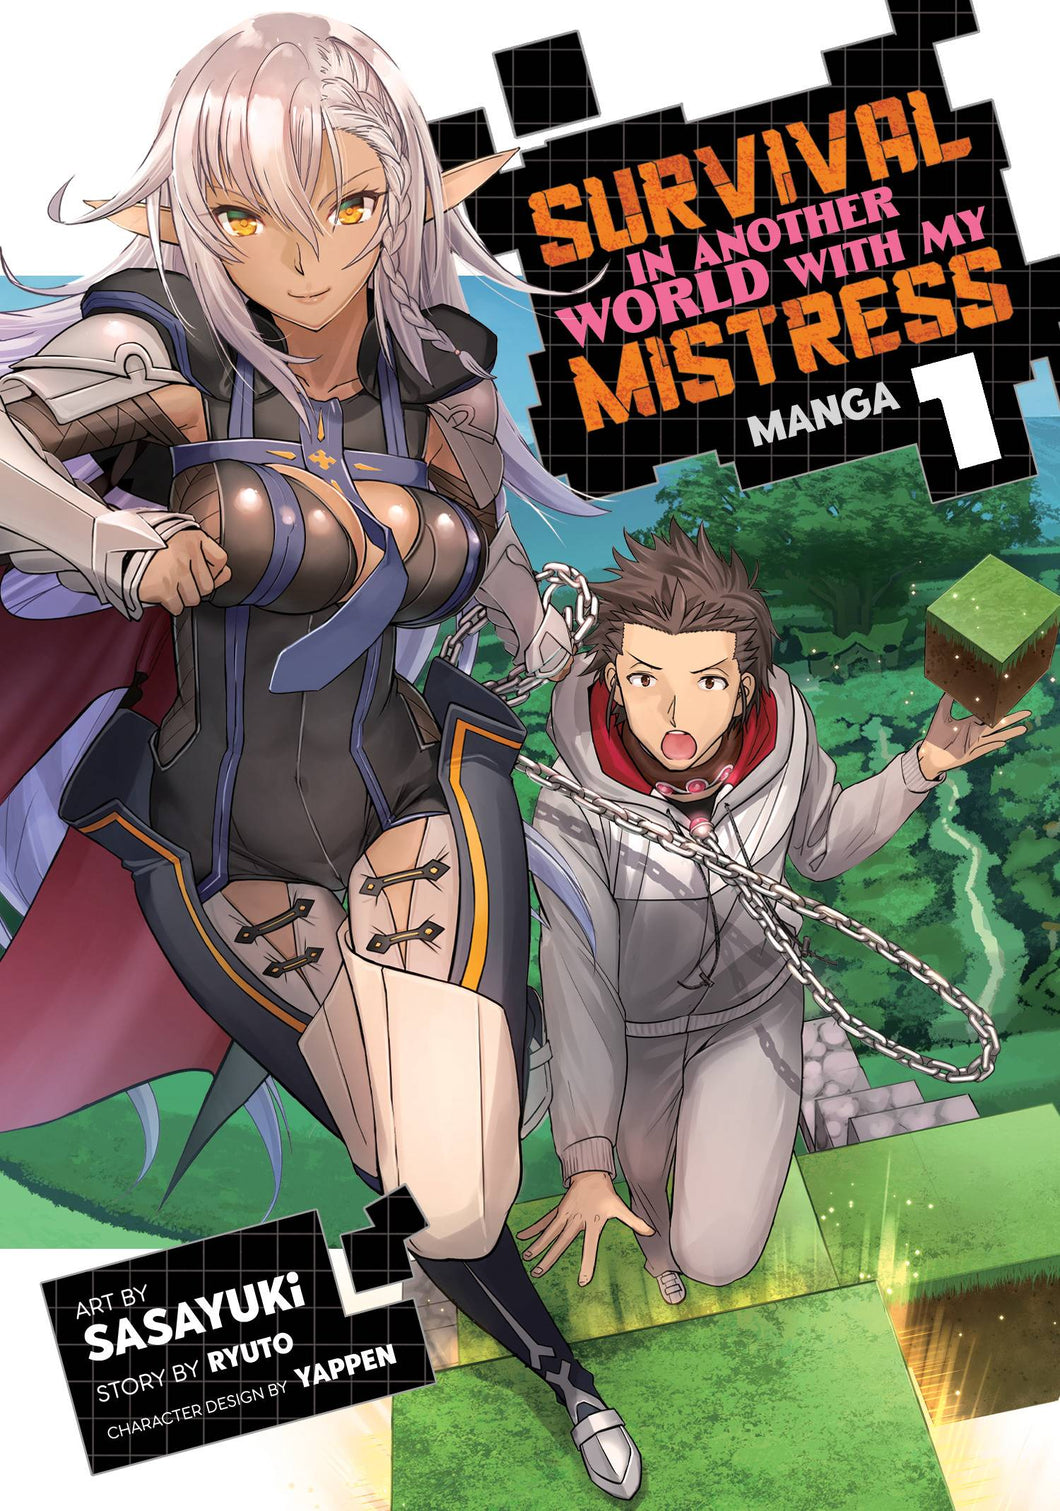 Survival In Another World With My Mistress GN Vol 01 - Books